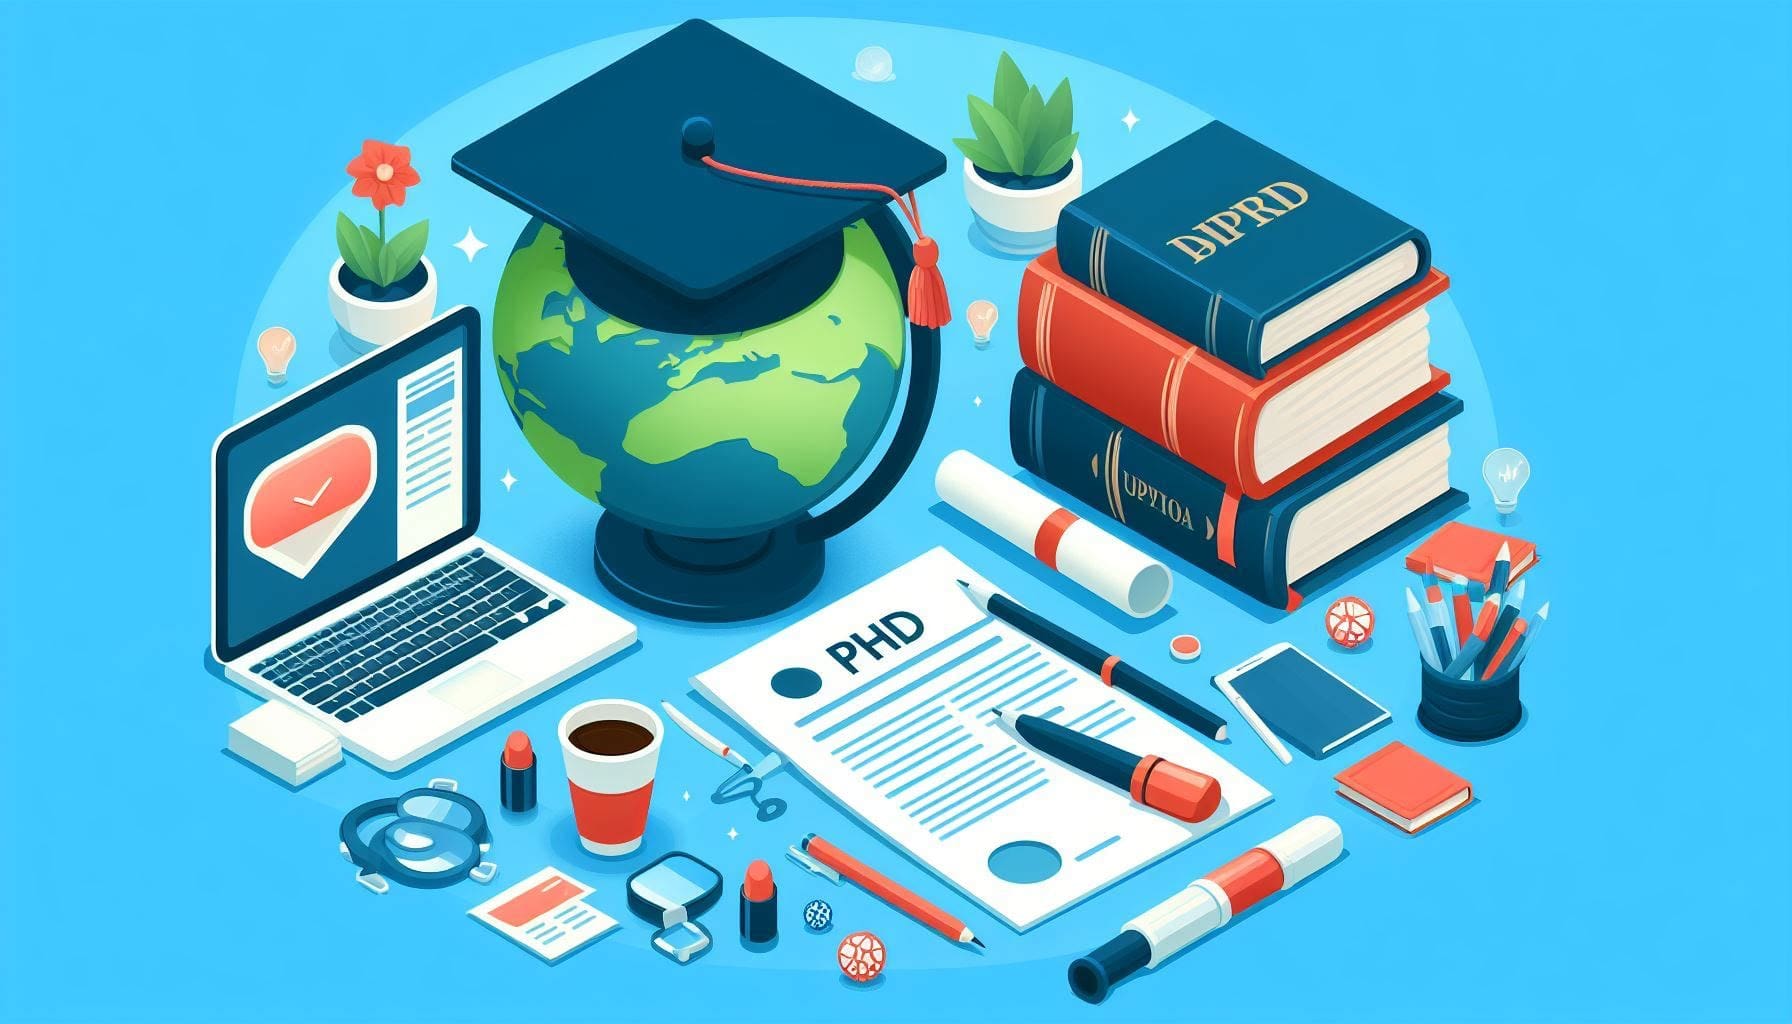 Picture showing How to apply for phd abroad. There is a globe, computer, some books and PhD application form in front of blue background